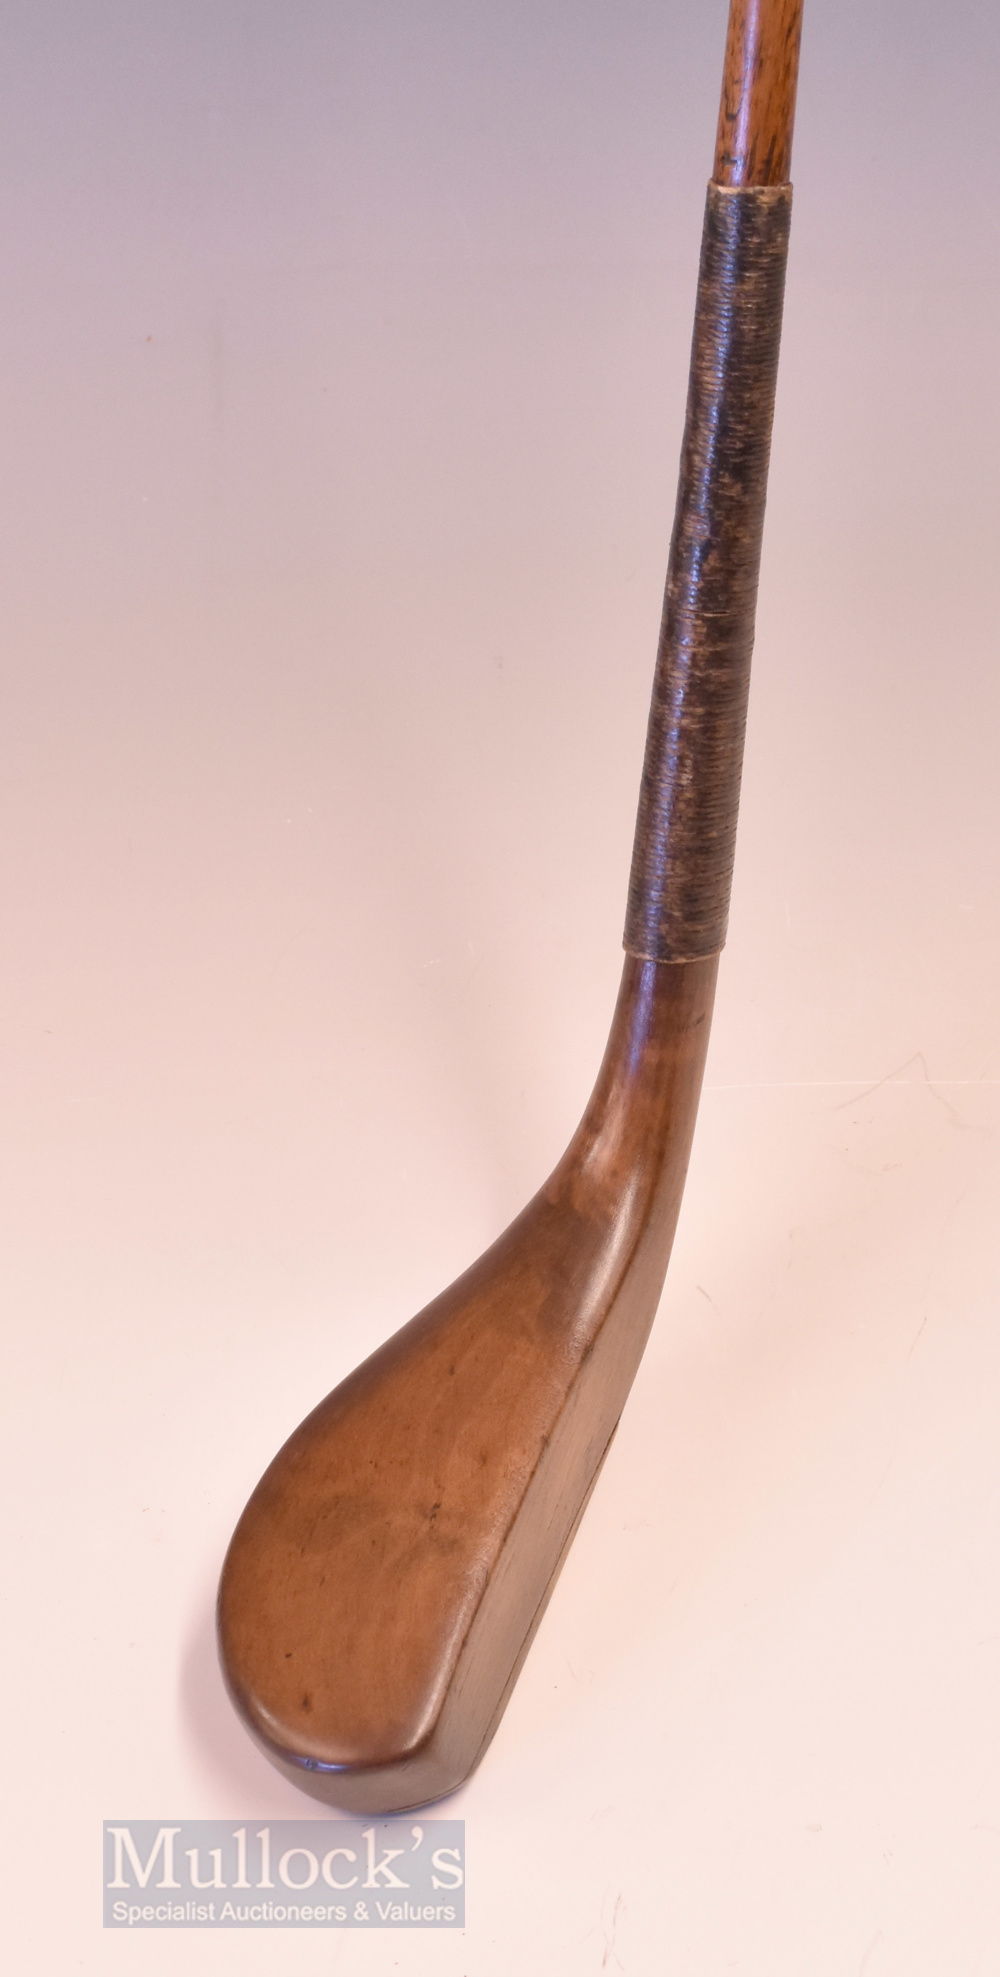 Early long nose feather ball era stained fruitwood putter c1850 - head measures 6" x 1"x 1 7/8"